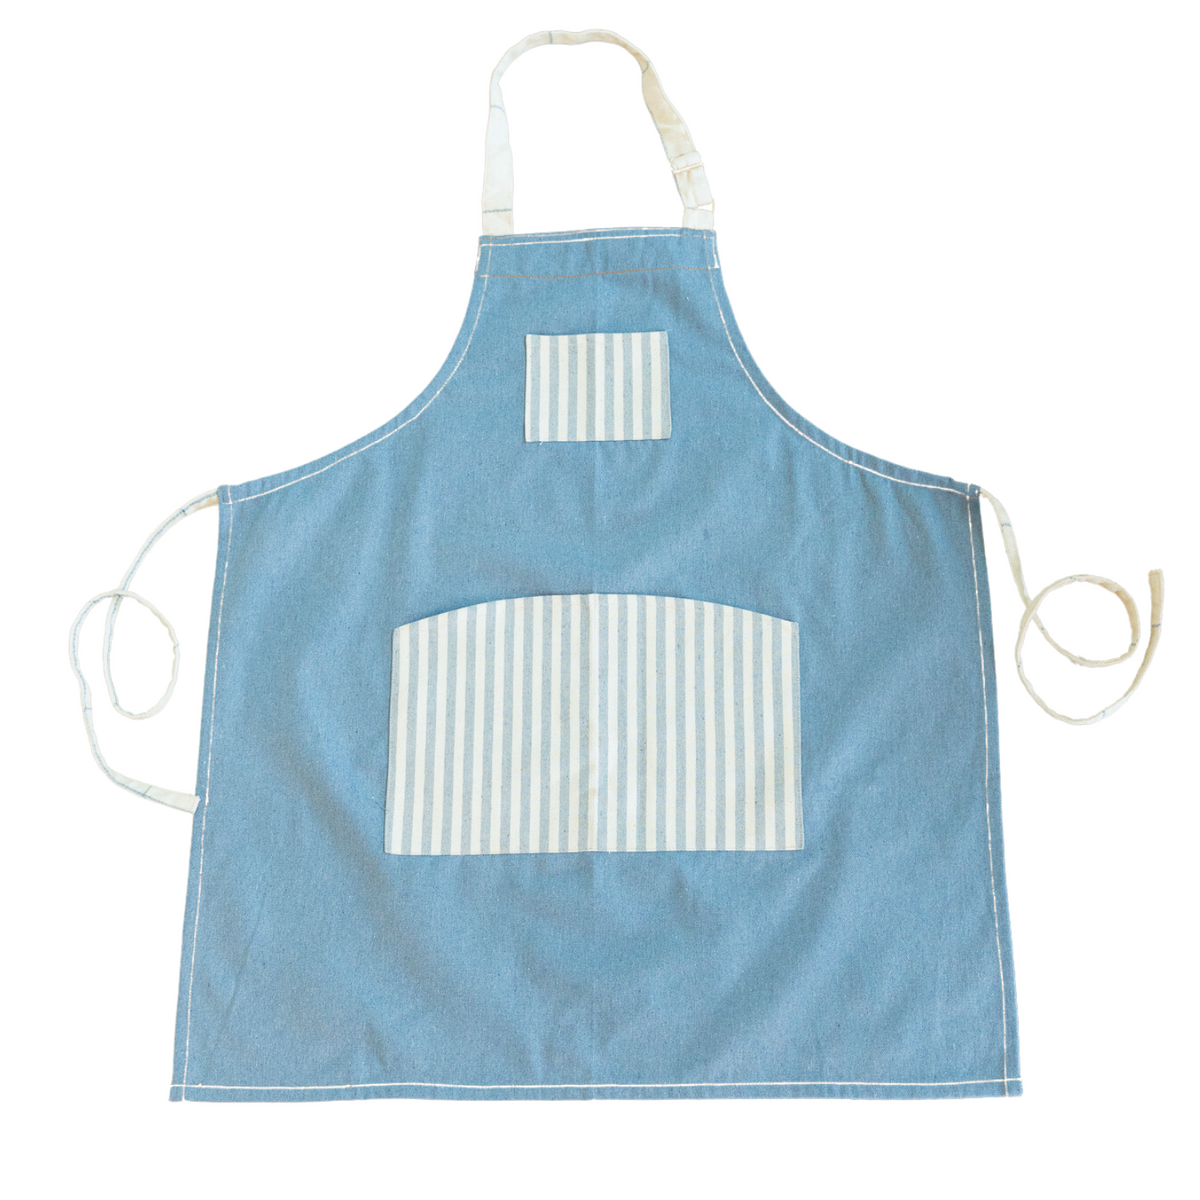 Upcycled Denim Apron With Pockets